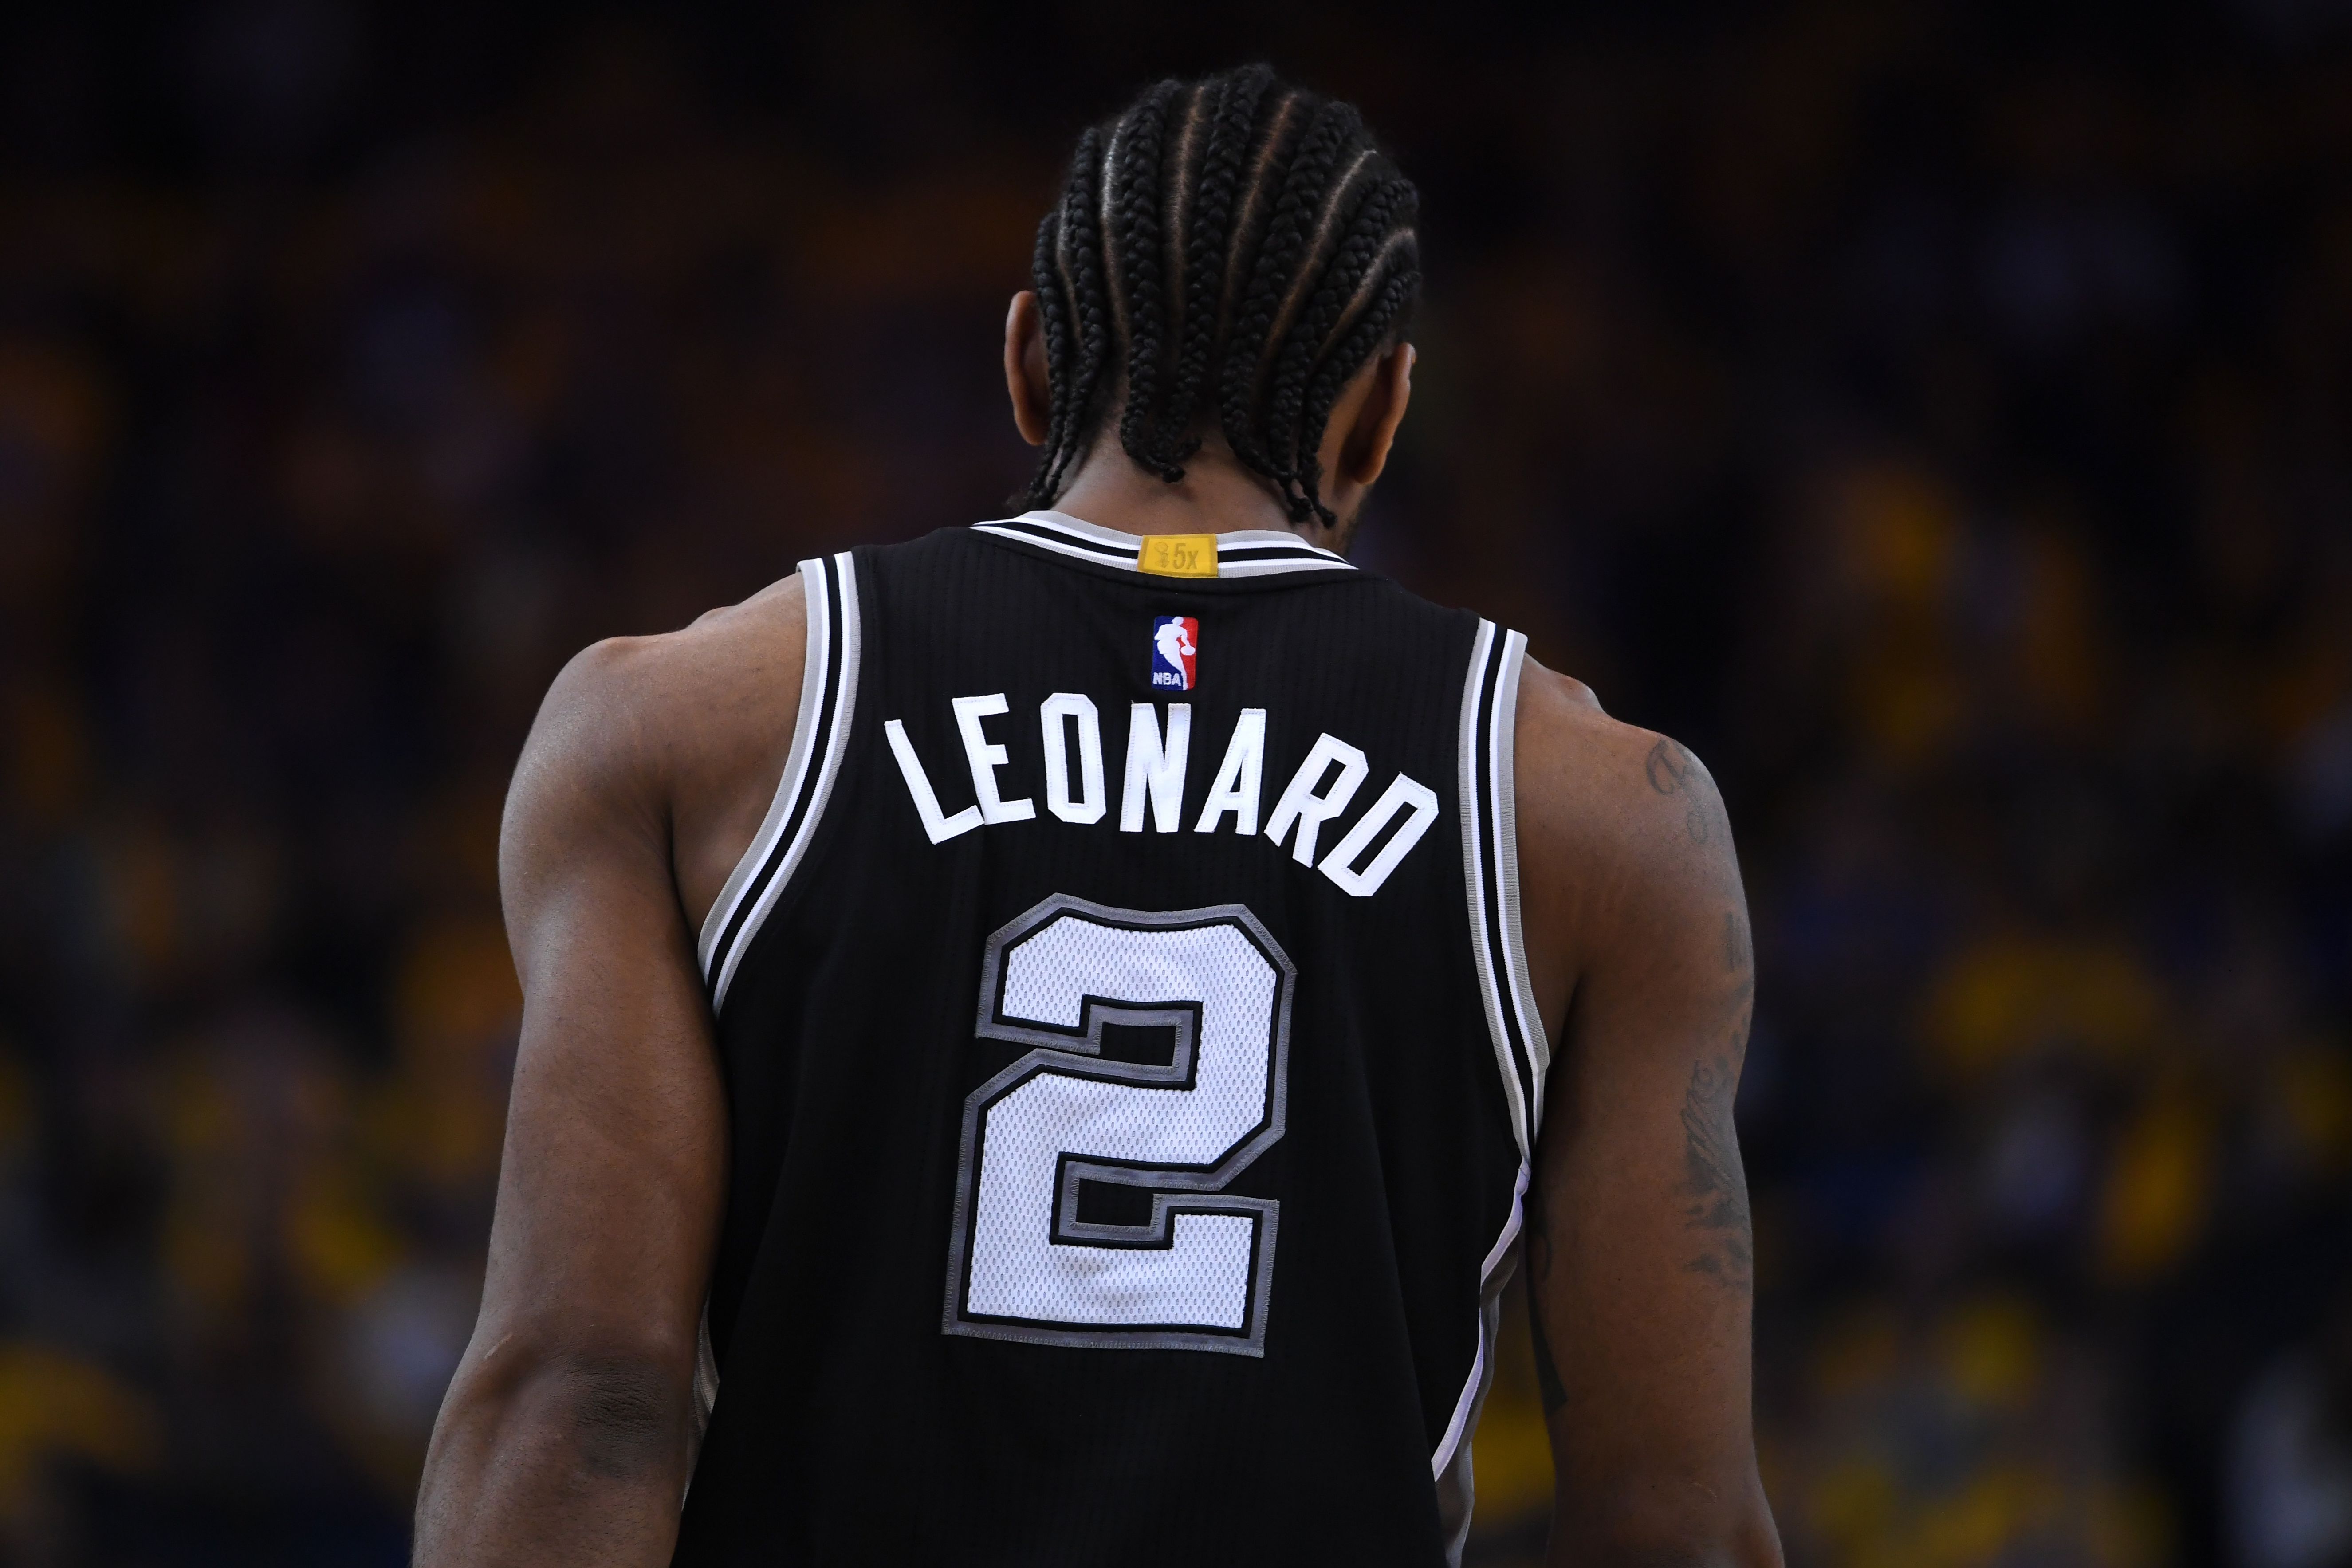 OAKLAND, CA - MAY 14: Kawhi Leonard #2 of the San Antonio Spurs stands on the court during Game One of the NBA Western Conference Finals against the Golden State Warriors at ORACLE Arena on May 14, 2017 in Oakland, California. NOTE TO USER: User expressly acknowledges and agrees that, by downloading and or using this photograph, User is consenting to the terms and conditions of the Getty Images License Agreement.